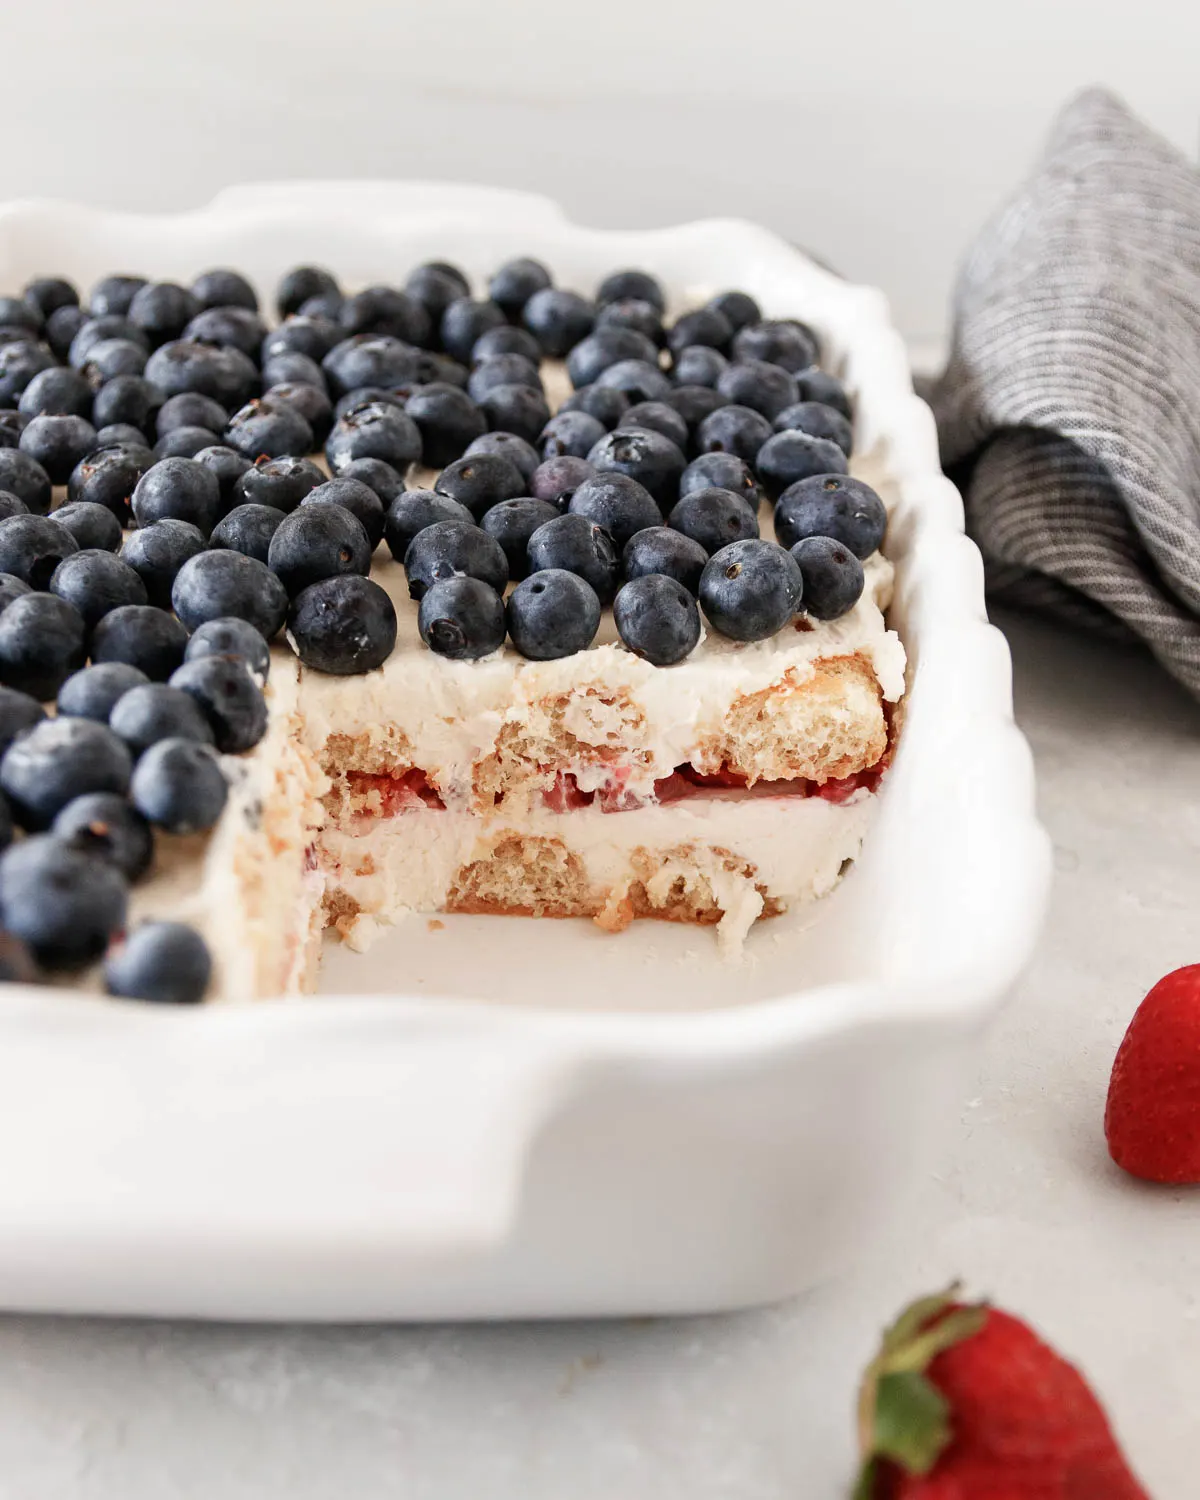 Close up of the strawberry tiramisu in the casserole dish after a slice has been removed. This shows a cross-section of the red, white, and blue layers.